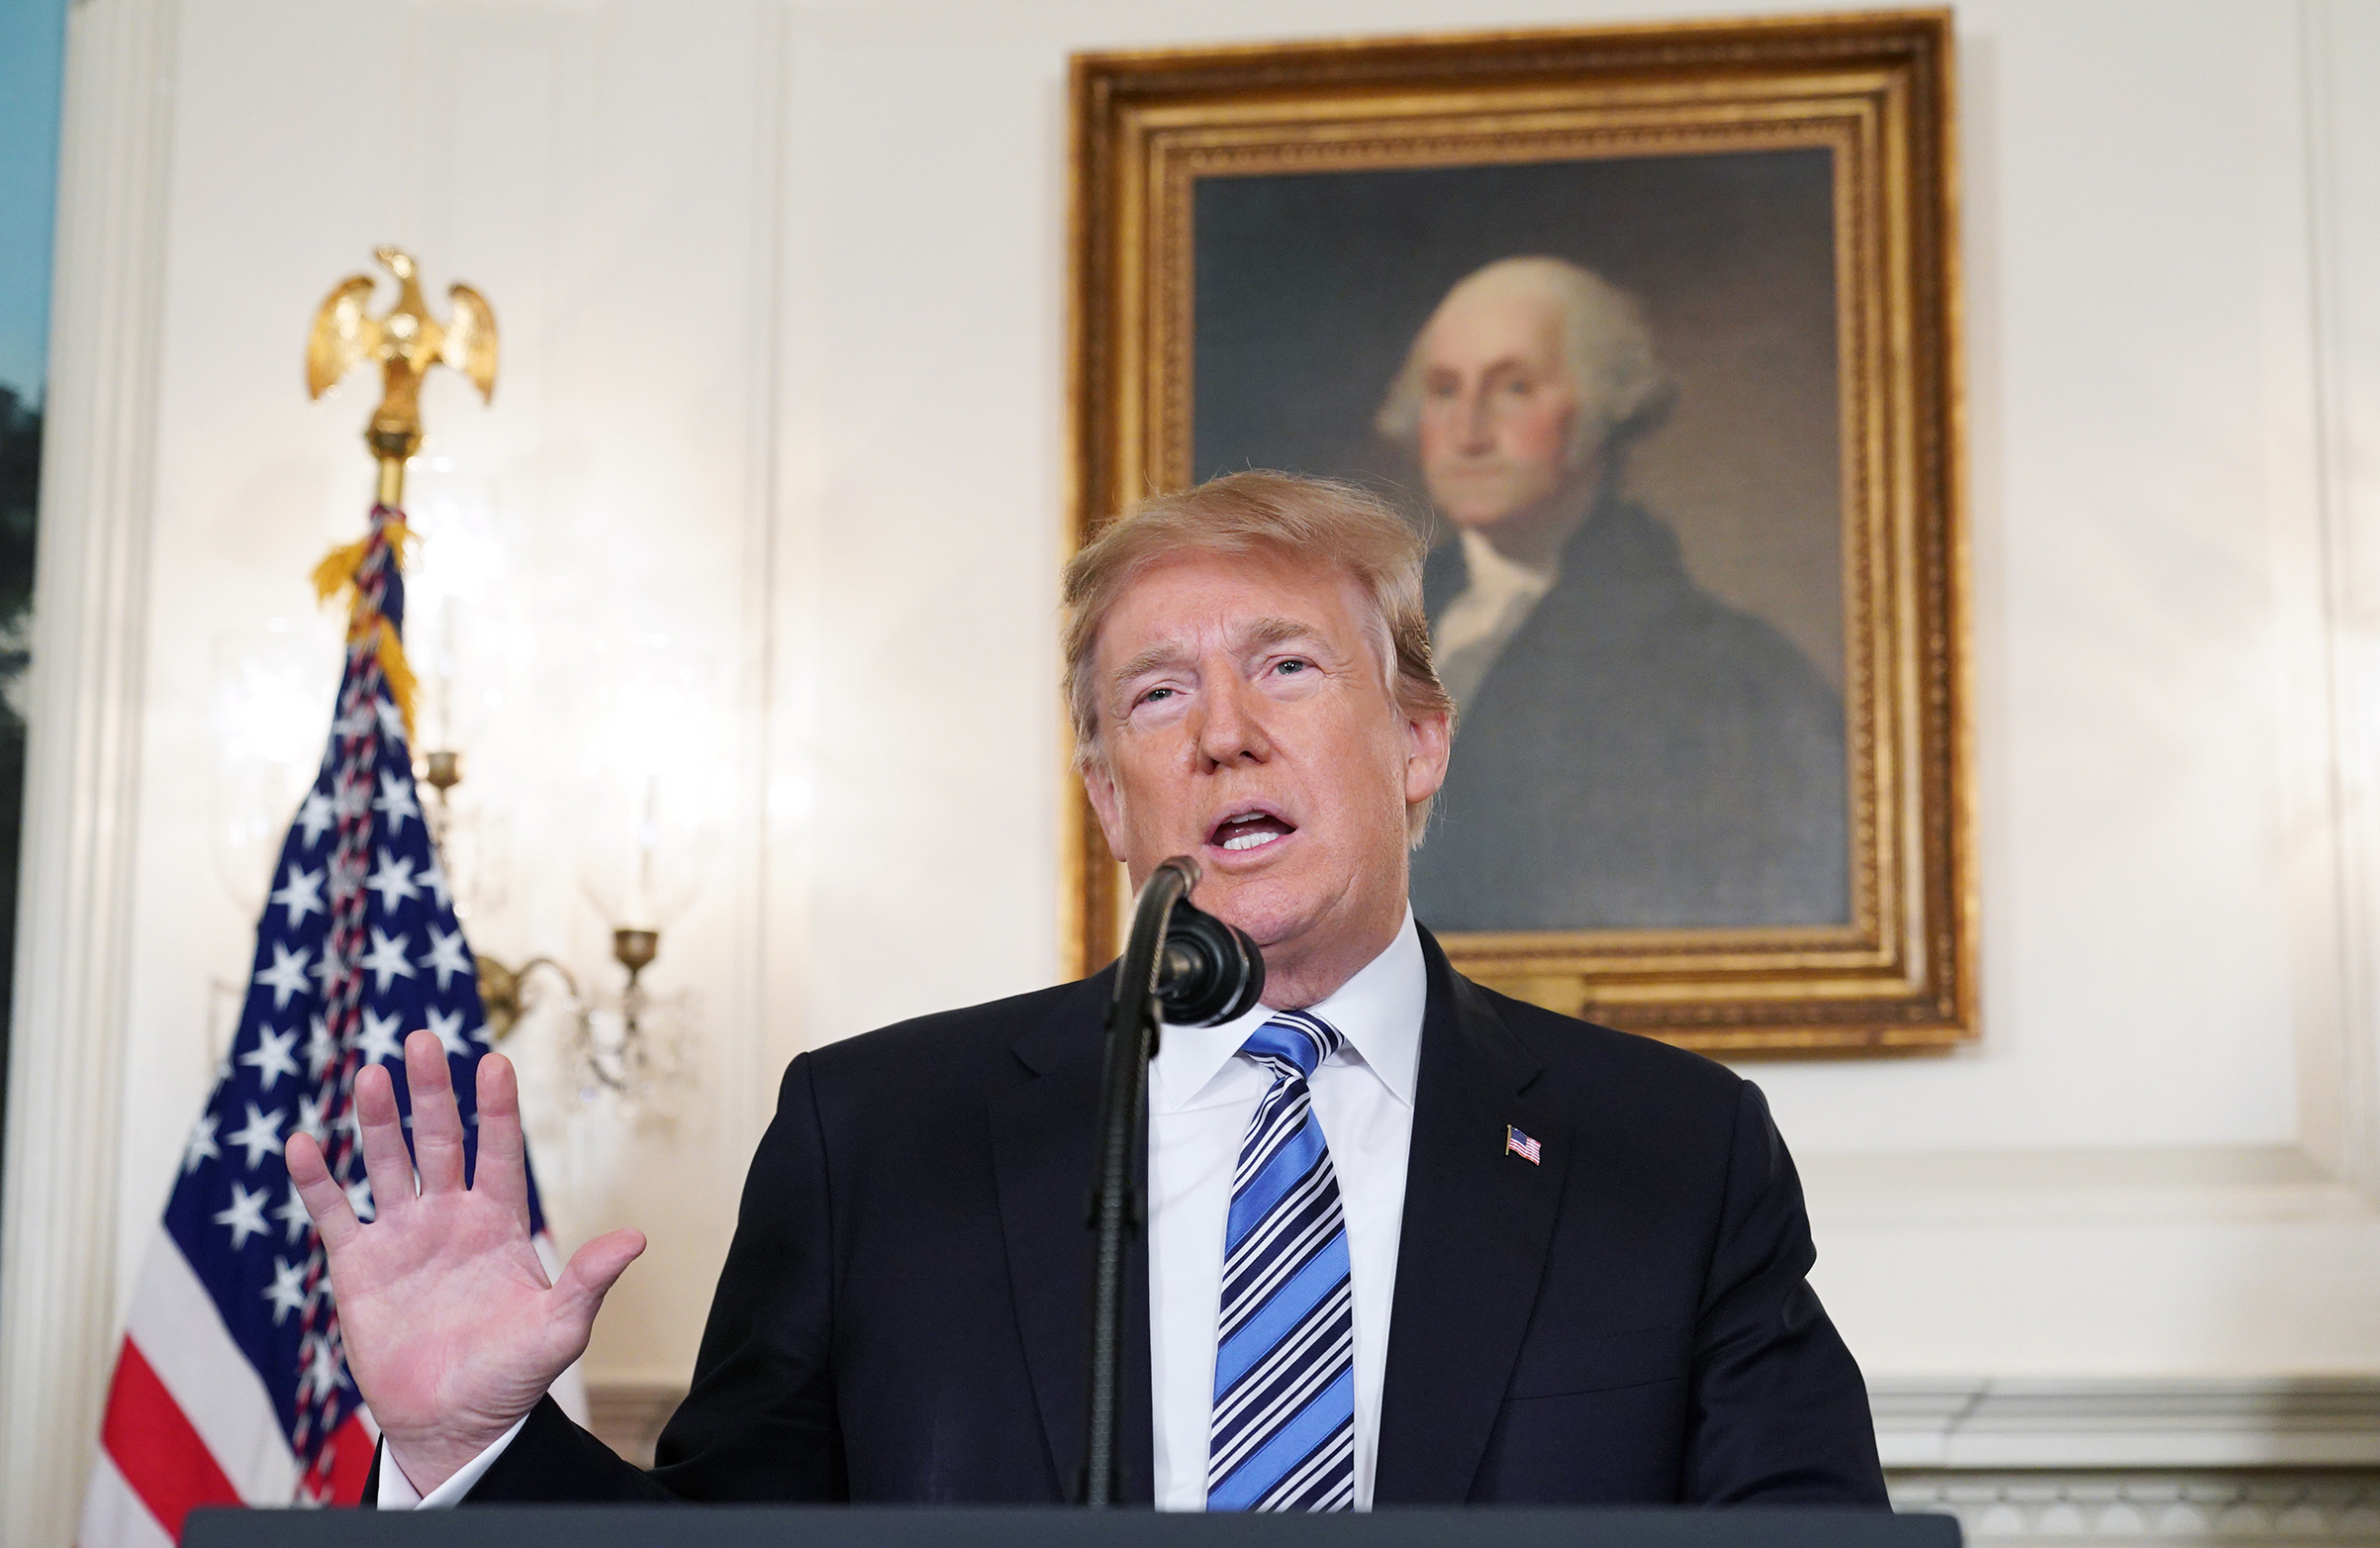 President Donald Trump speaks in the Diplomatic Reception Room of the White House on Feb. 15, 2018 in Washington, DC. (Mandel Ngan—AFP/Getty Images)